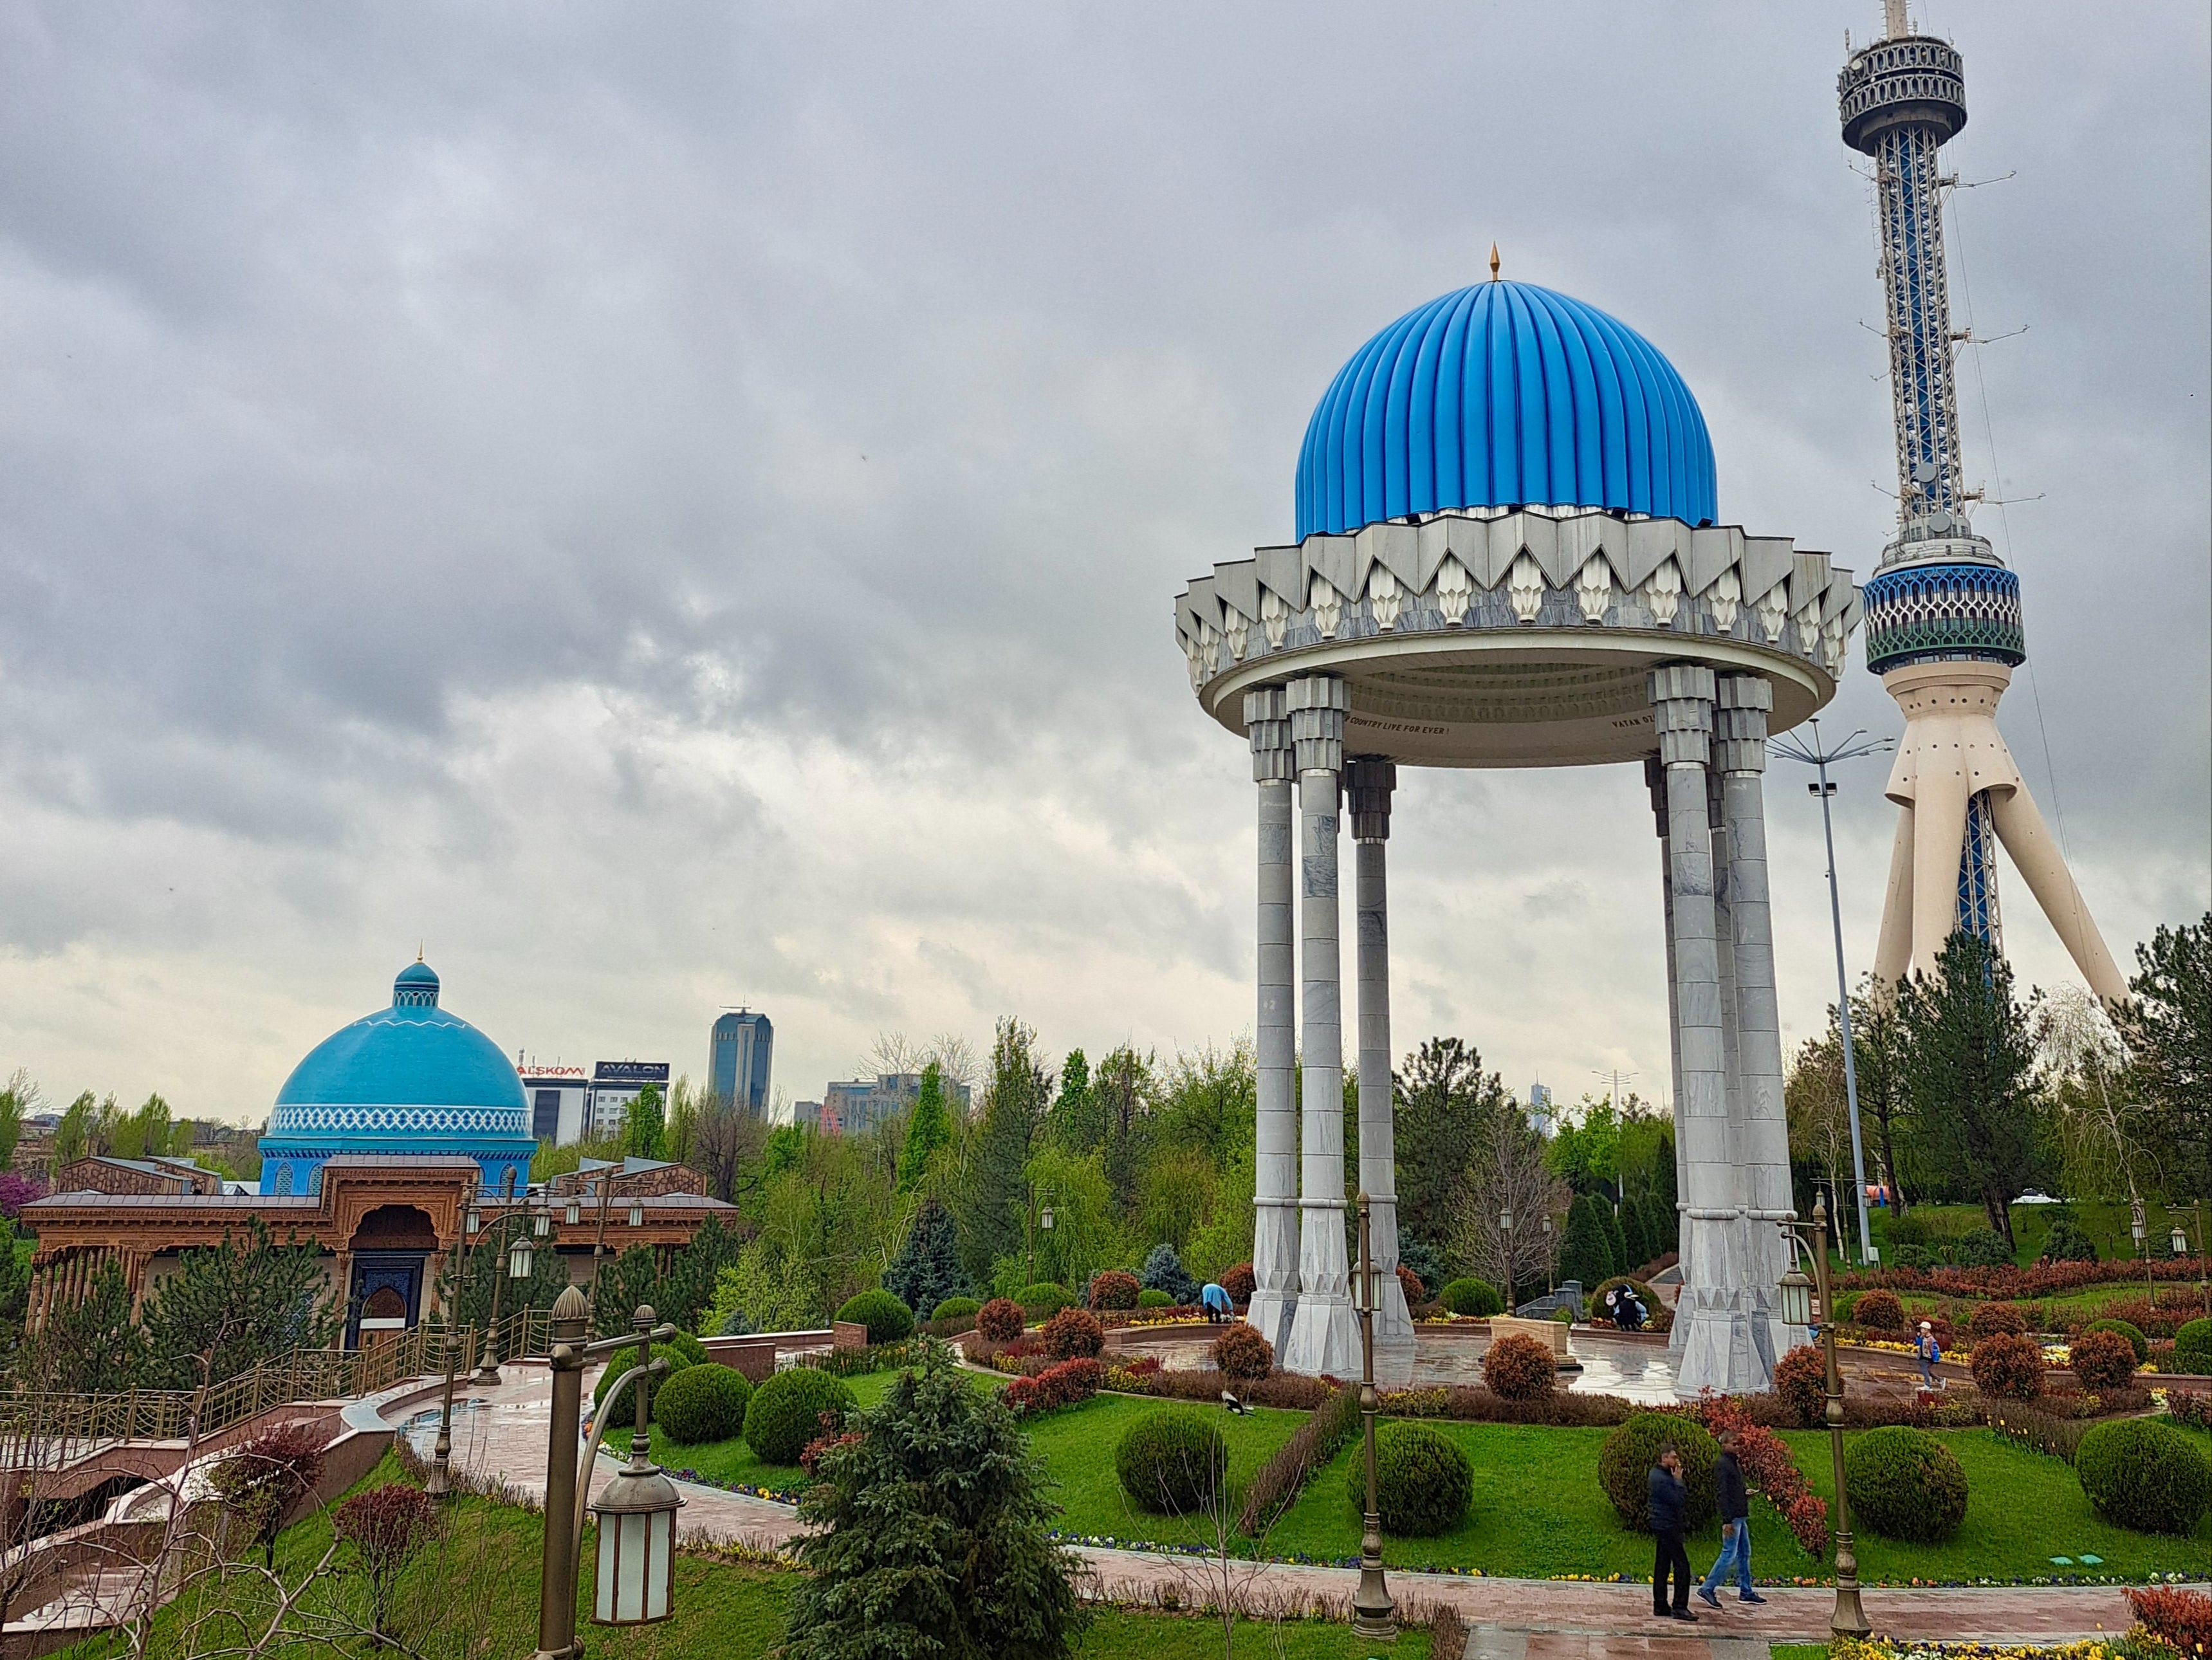 Tower of power: Tashkent TV tower, seen from one of the city’s parks